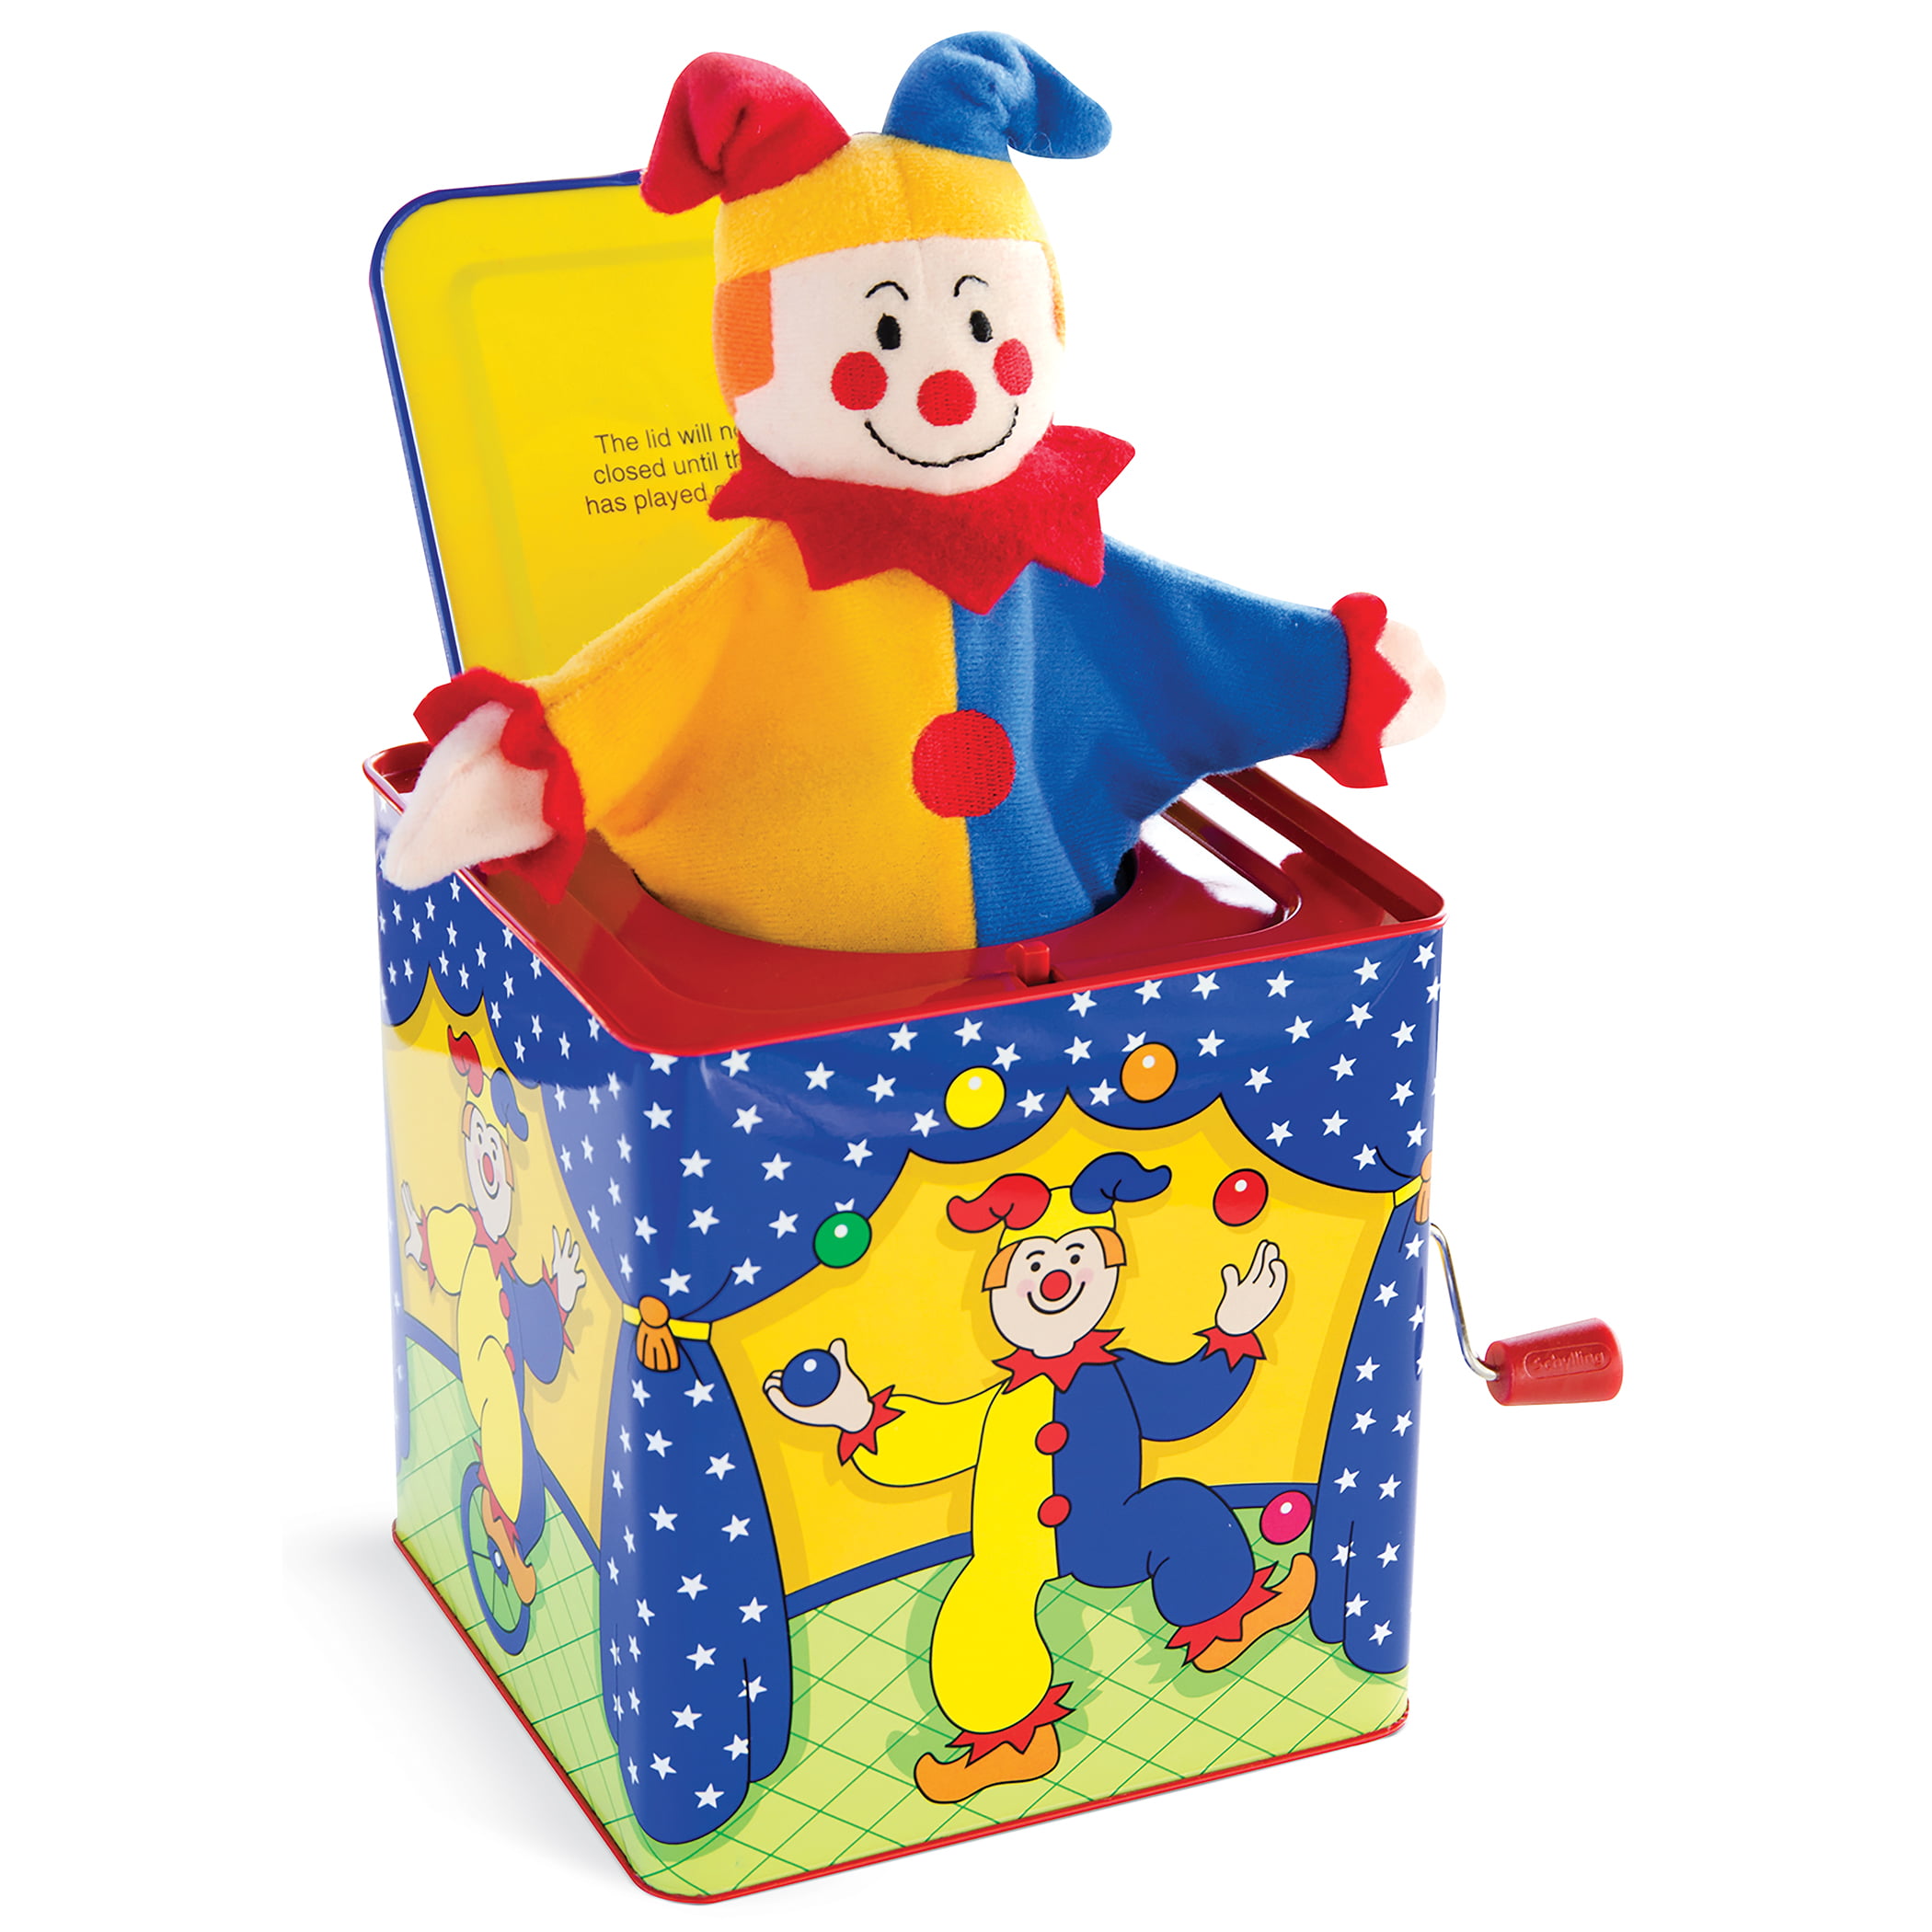 Schylling-Circus-Jack-In-The-Box-Musical-Children-Toy-Clown 